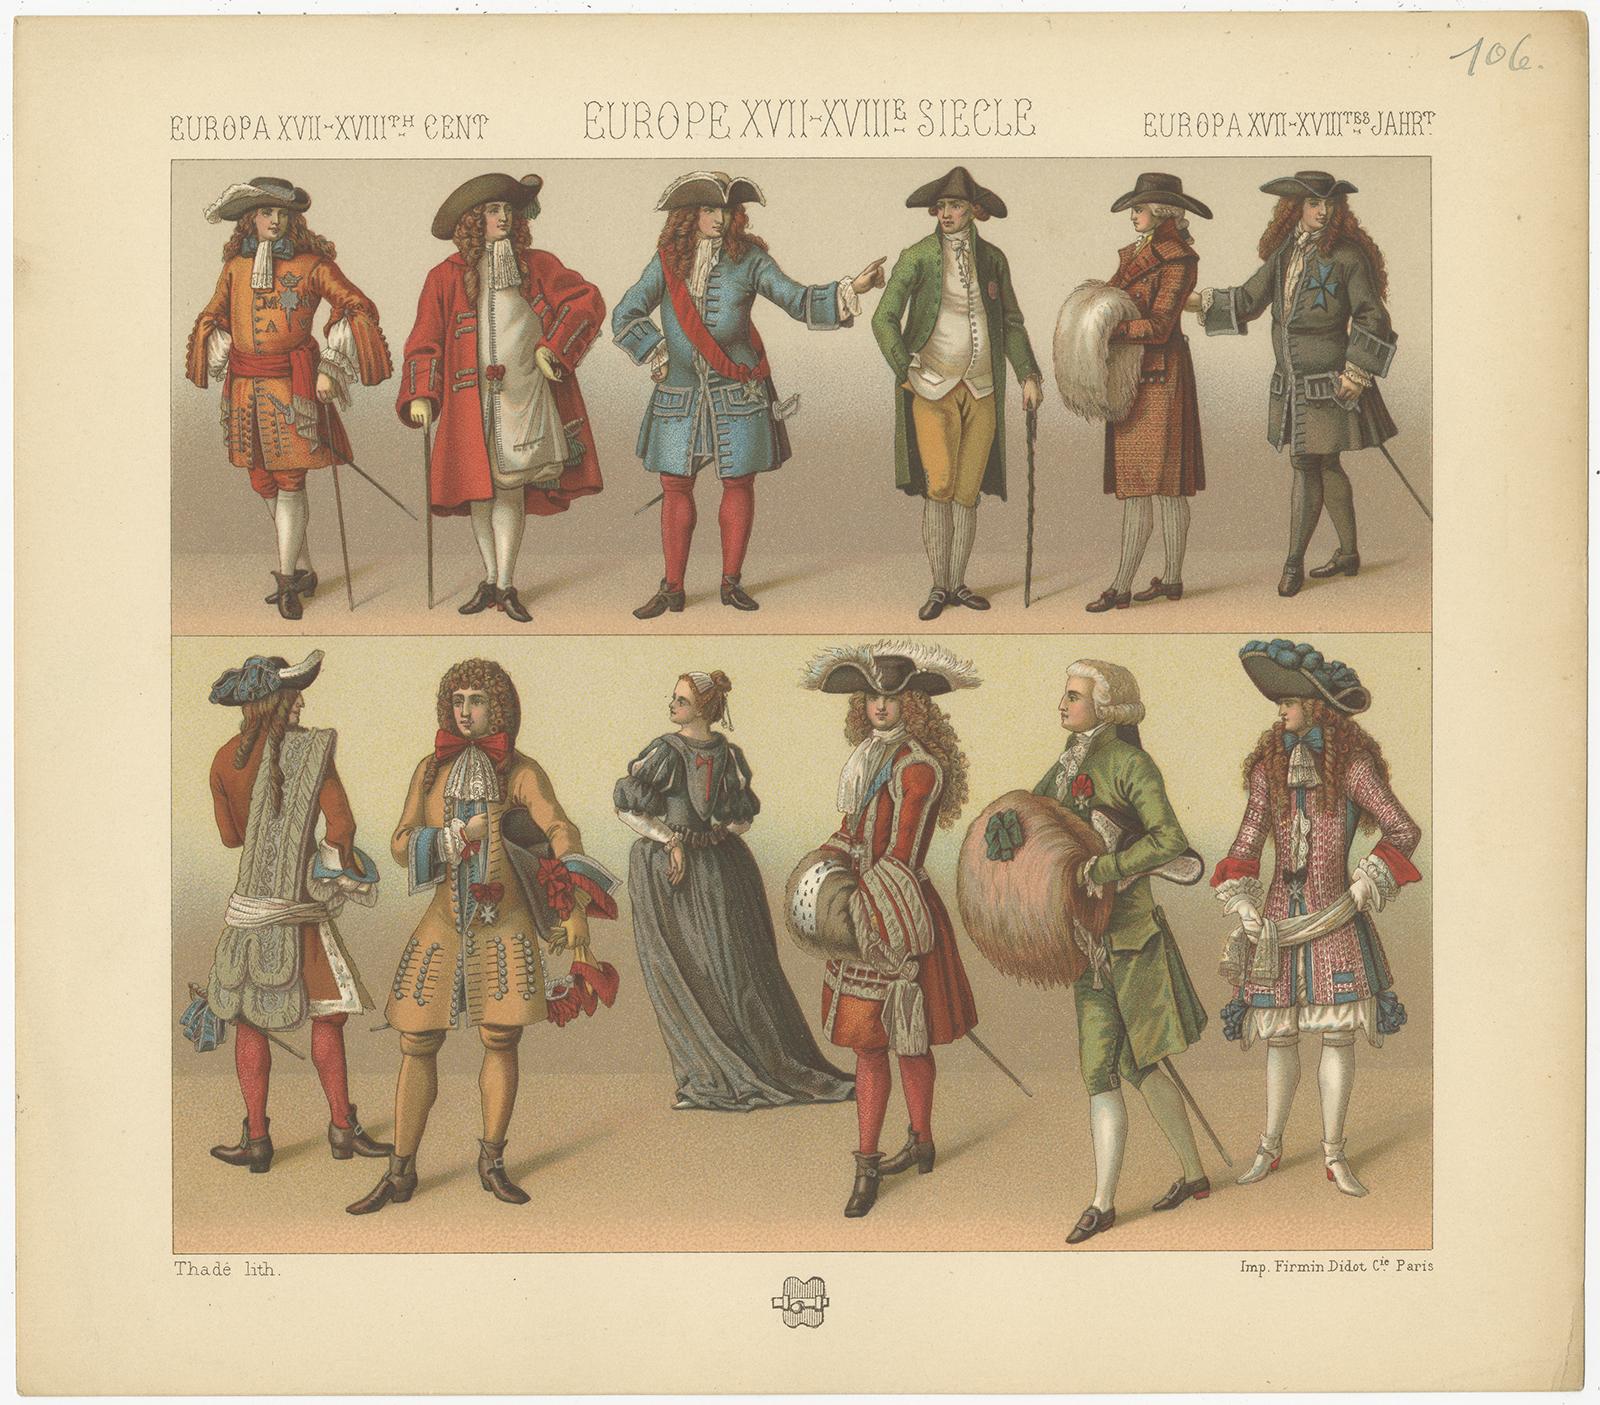 Antique print titled 'Europa XVII, XVIIIth Cent - Europe XVII, XVIIIe Siecle - Europa XVII, XVIIItes Jahr'. Chromolithograph of European 17th-18th century costumes. This print originates from 'Le Costume Historique' by M.A. Racinet. Published circa